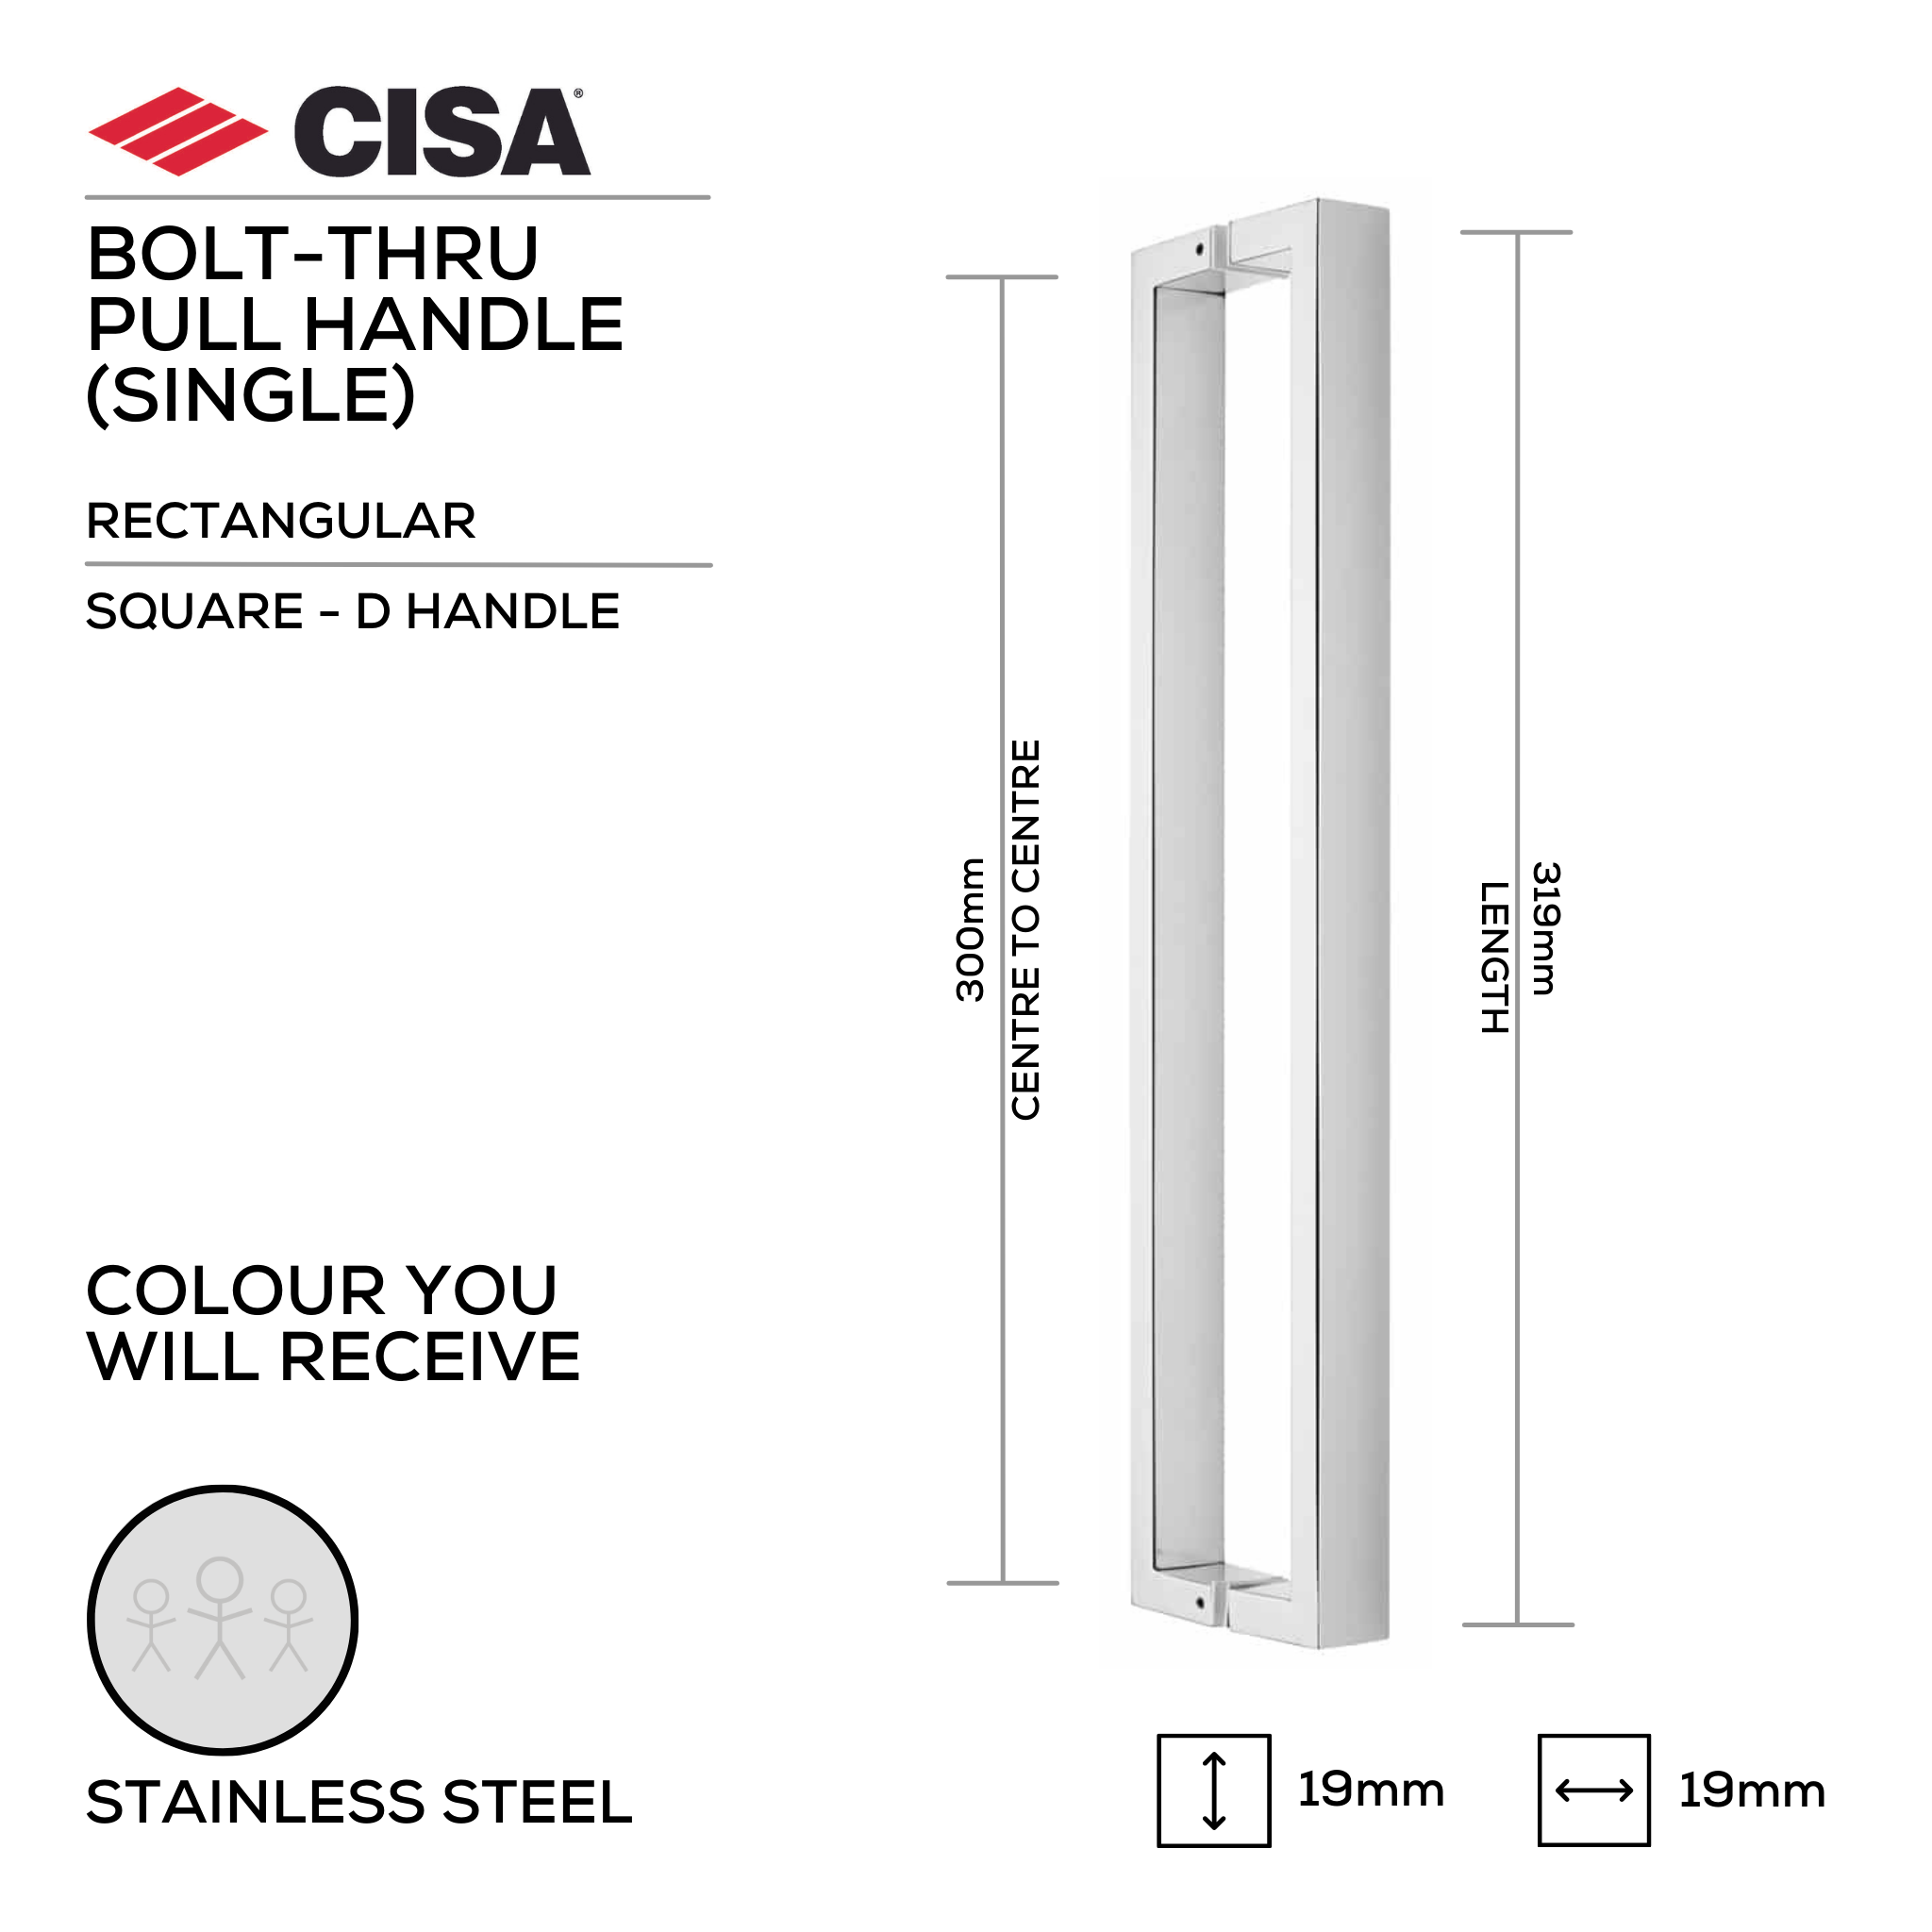 FP.SD02.BTF.SS, Pull Handle, Square, D Handle, BoltThru, 19mm (d) x 319mm (l) x 300mm (ctc), Stainless Steel, CISA